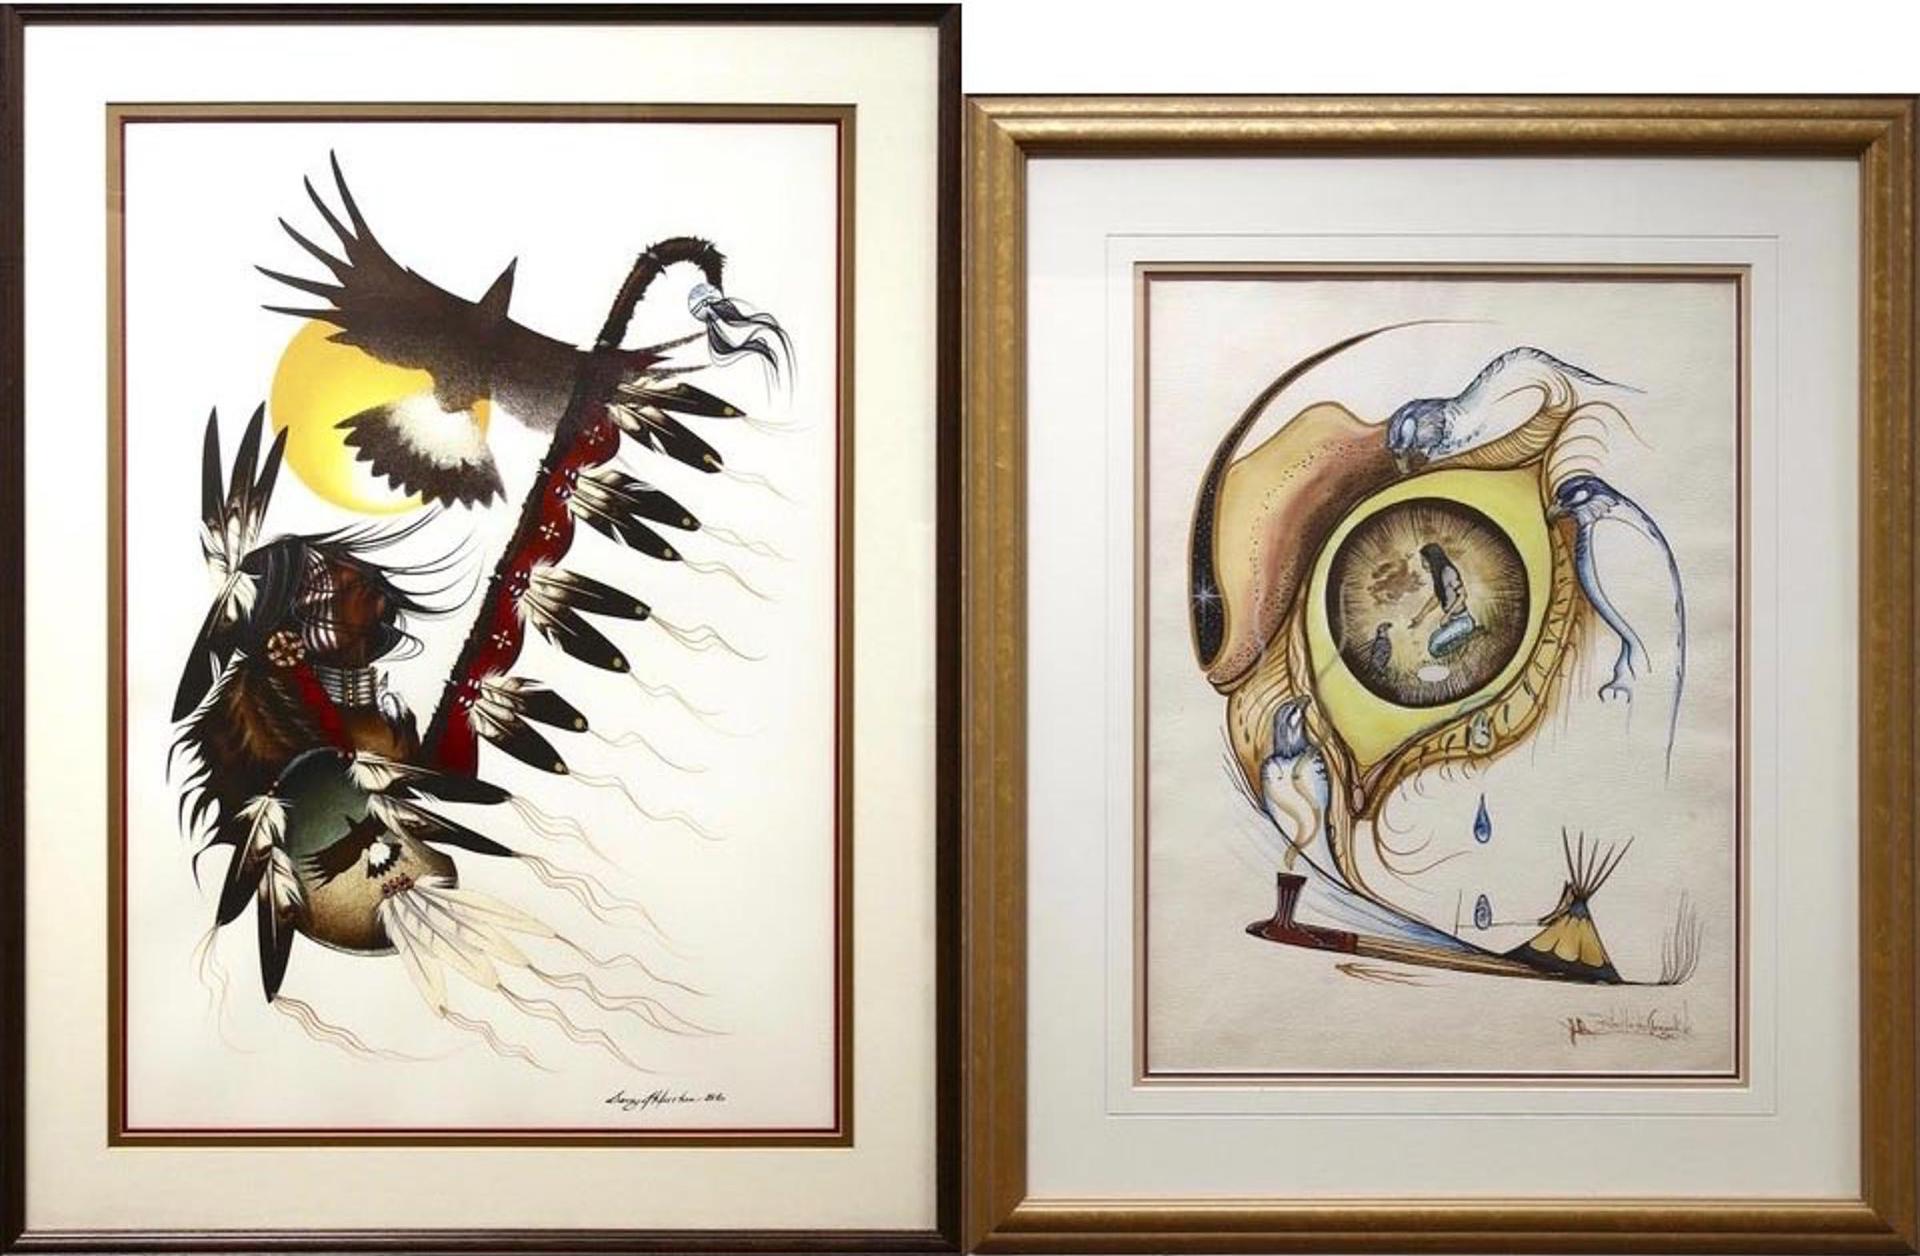 Garry J. Meeches (1957) - Untitled (Warrior With Eagle And Sun) & Untitled (Peace Pipe With Birds)